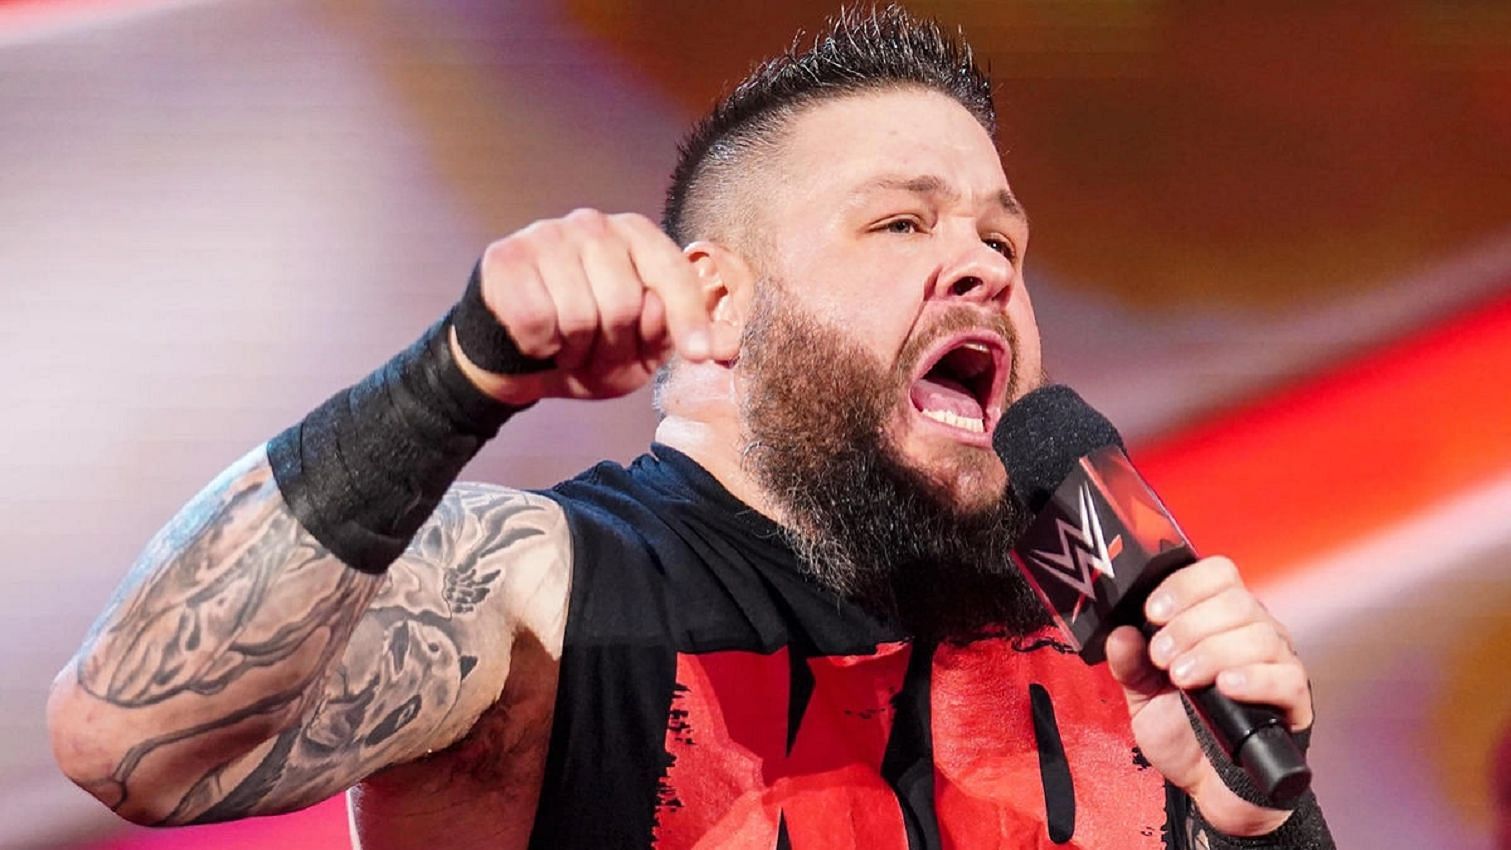 Kevin Owens vs Punk could be incredible